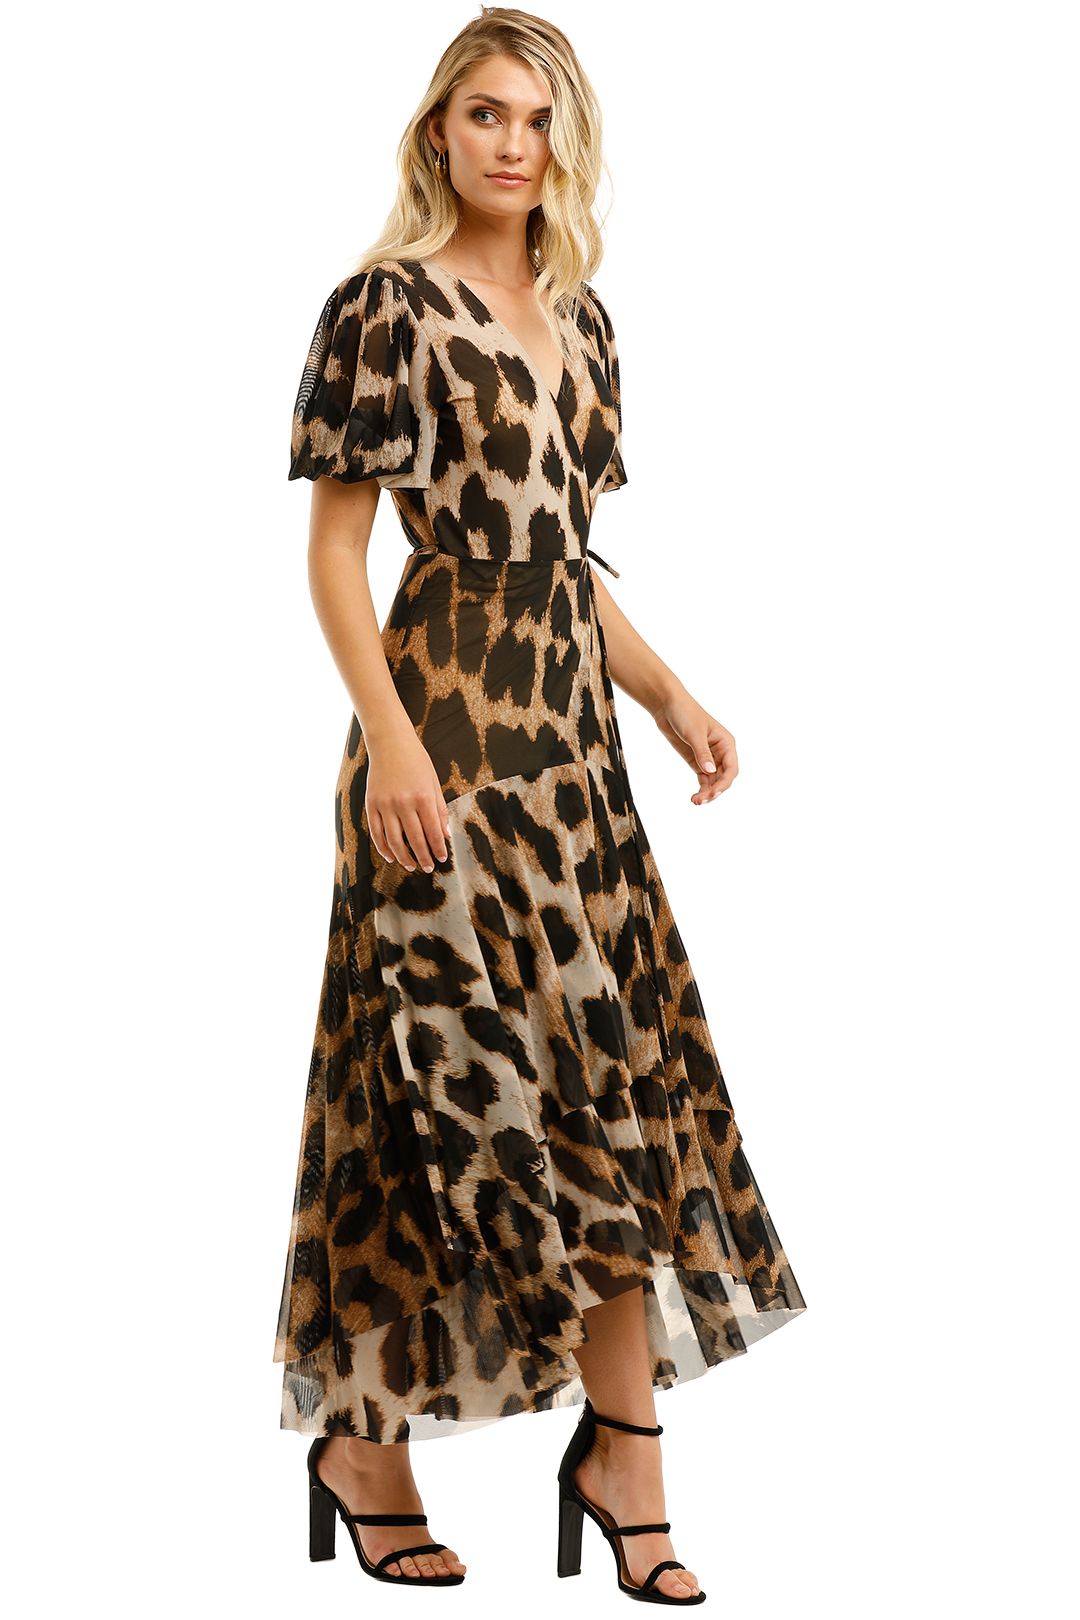 Leo Sleeves Maxi Dress in Leopard by Ganni for Hire | GlamCorner